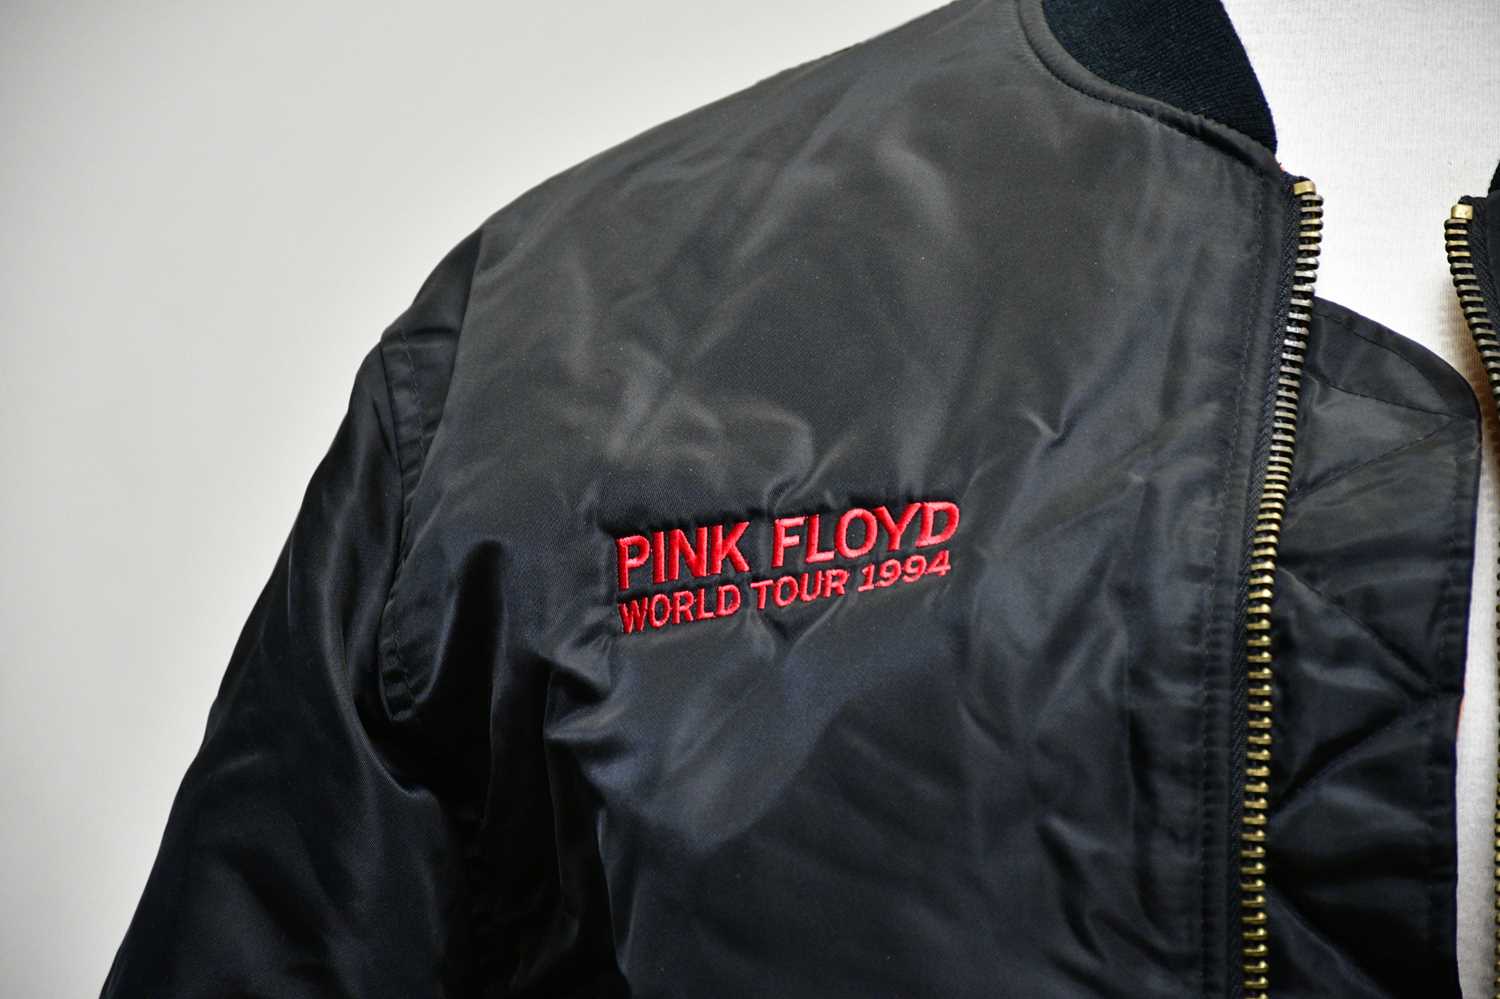 PINK FLOYD; a World Tour 1994 crew jacket. - Image 3 of 5